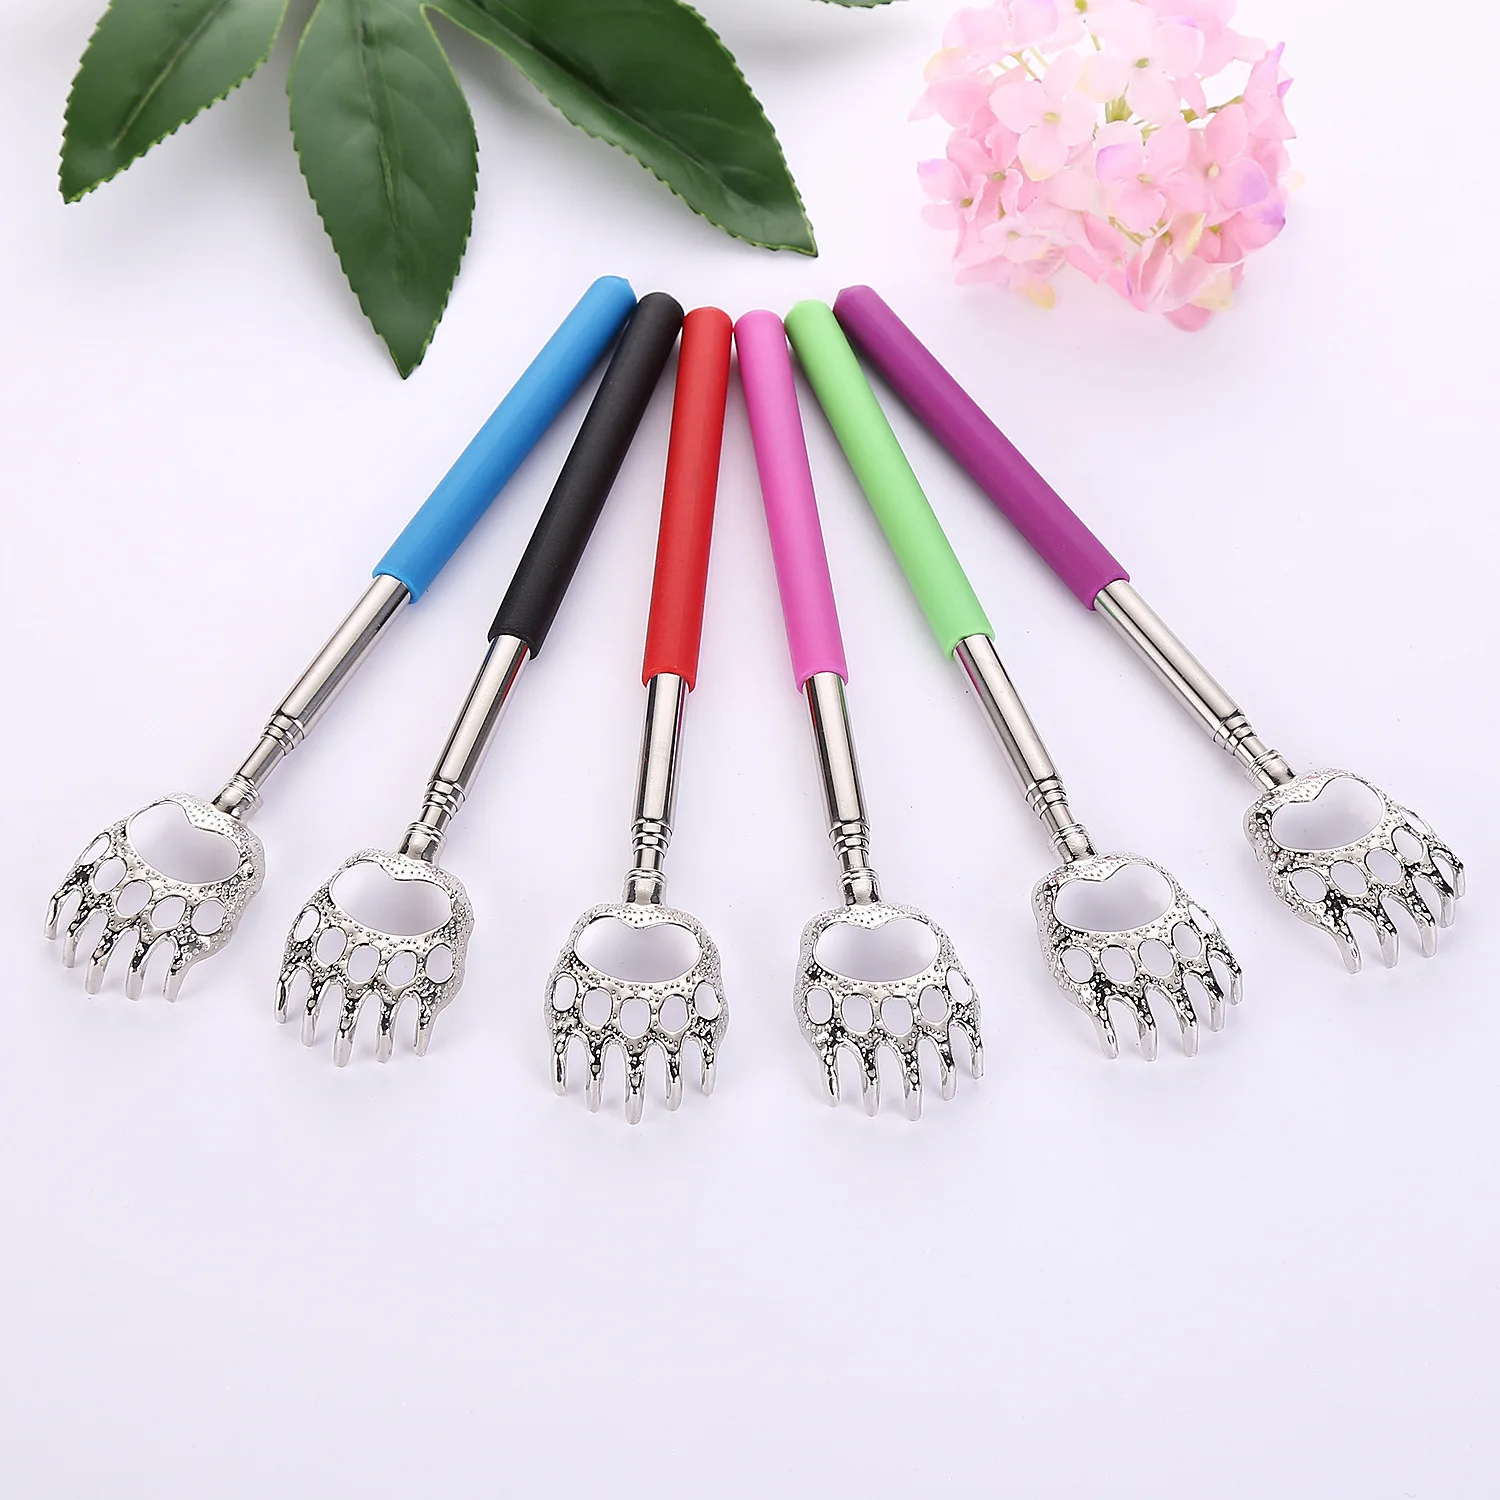 

Stainless Steel Back Scratcher Telescopic Scratching Massager Extendable Itch Old Man Happy Health Products Hackle Handicrafts